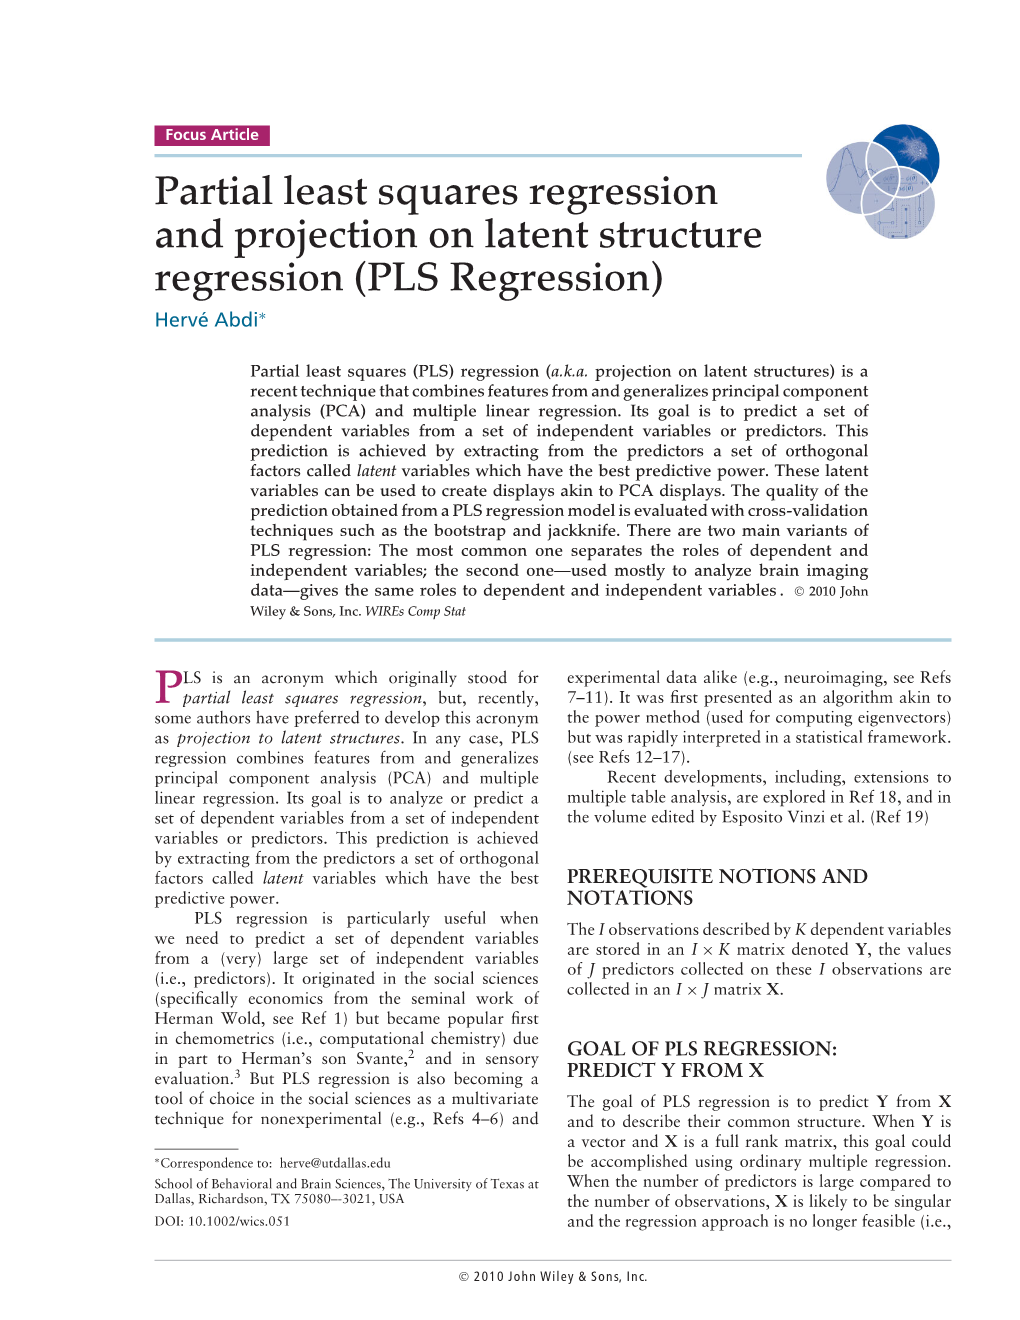 Partial Least Squares Regression and Projection on Latent Structure Regression (PLS Regression)